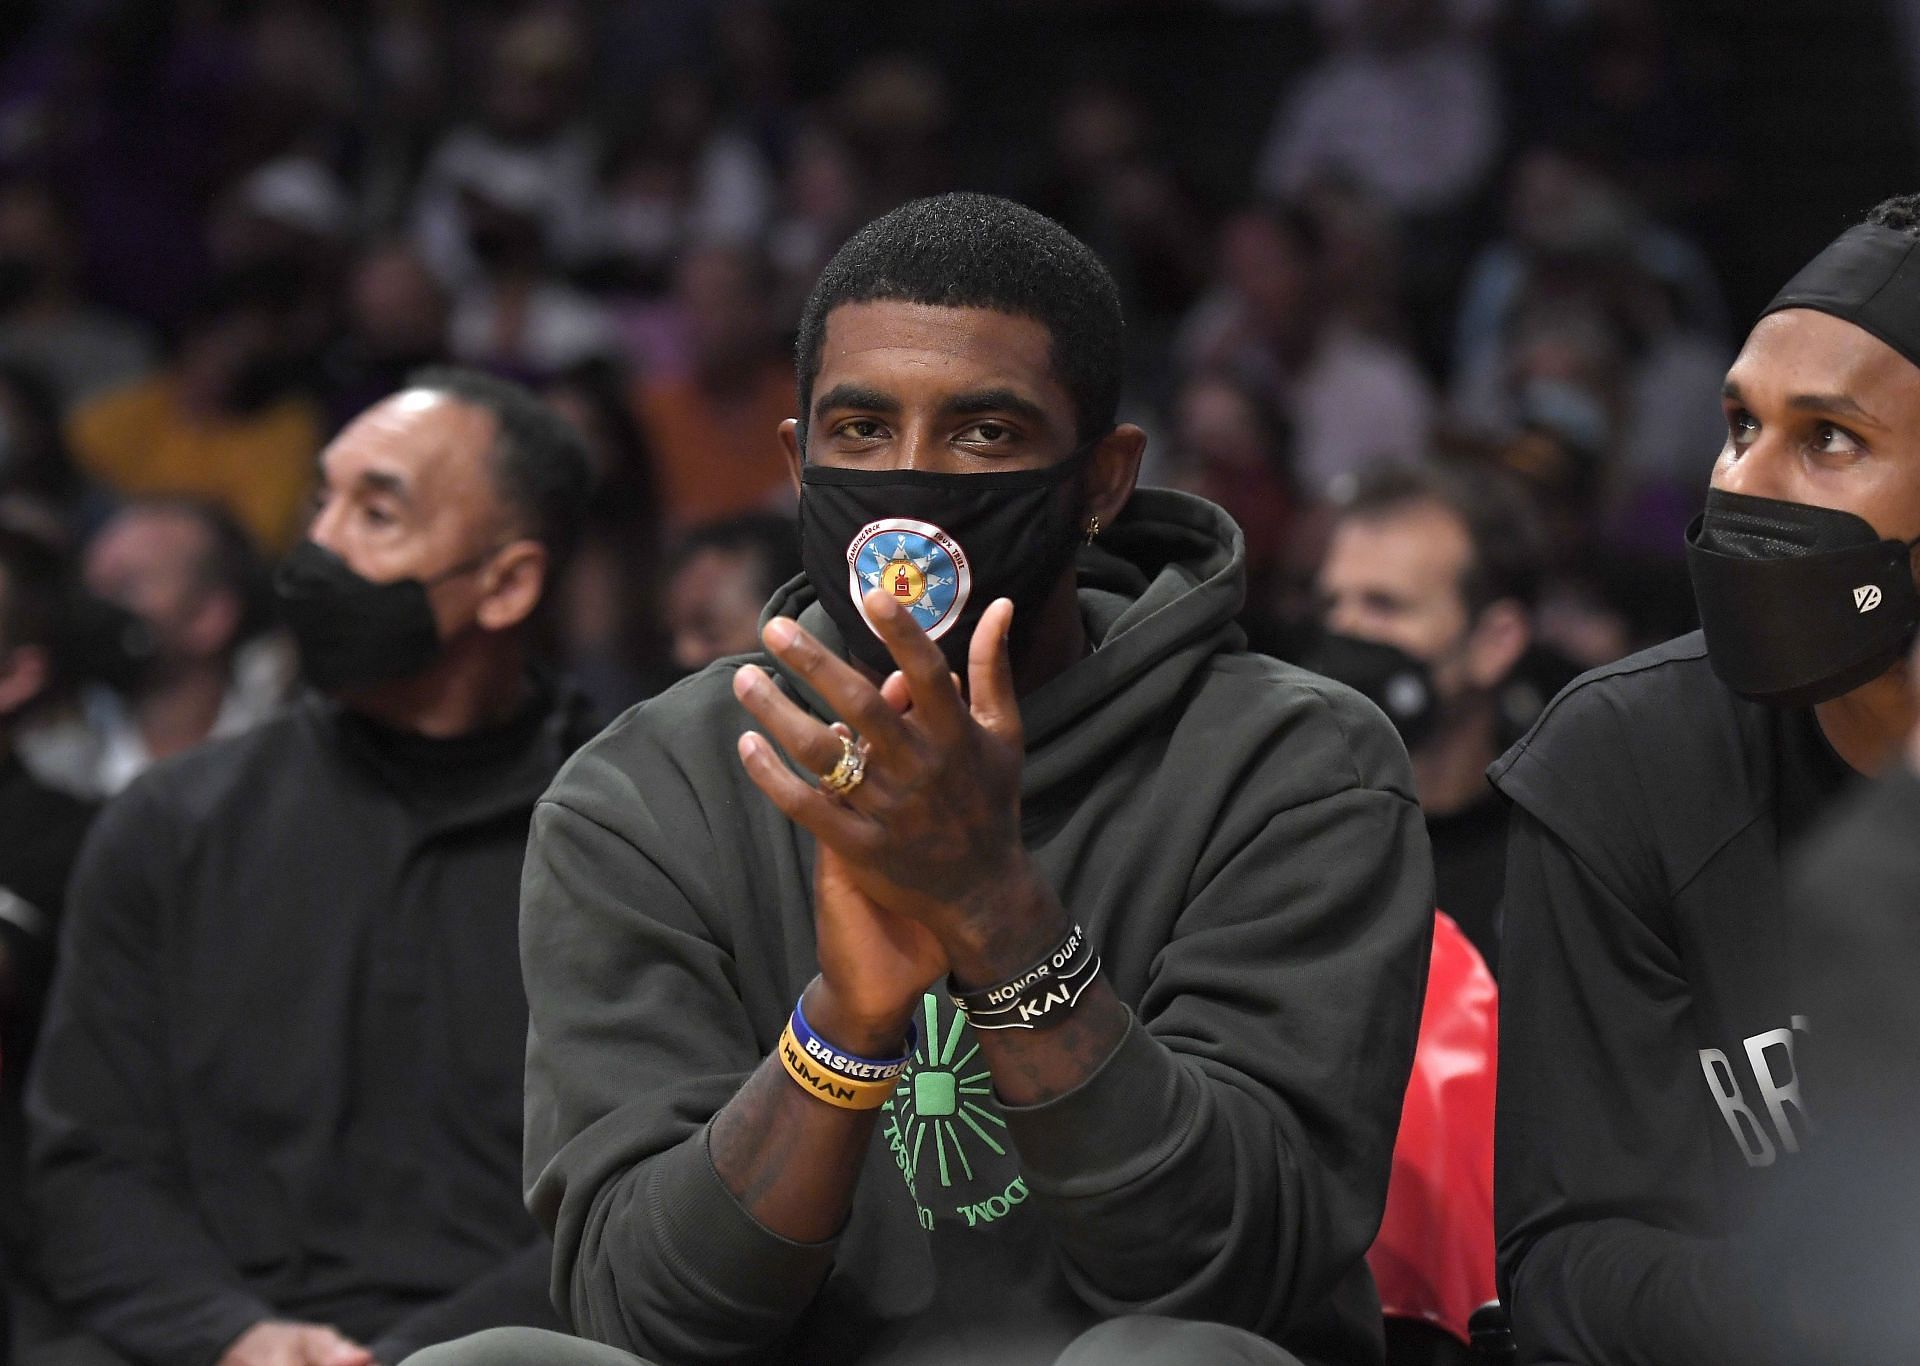 Kyrie Irving #11 of the Brooklyn Nets cheers from the bench during a preseason game against the Los Angeles Lakers at Staples Center on October 3, 2021 in Los Angeles, California.